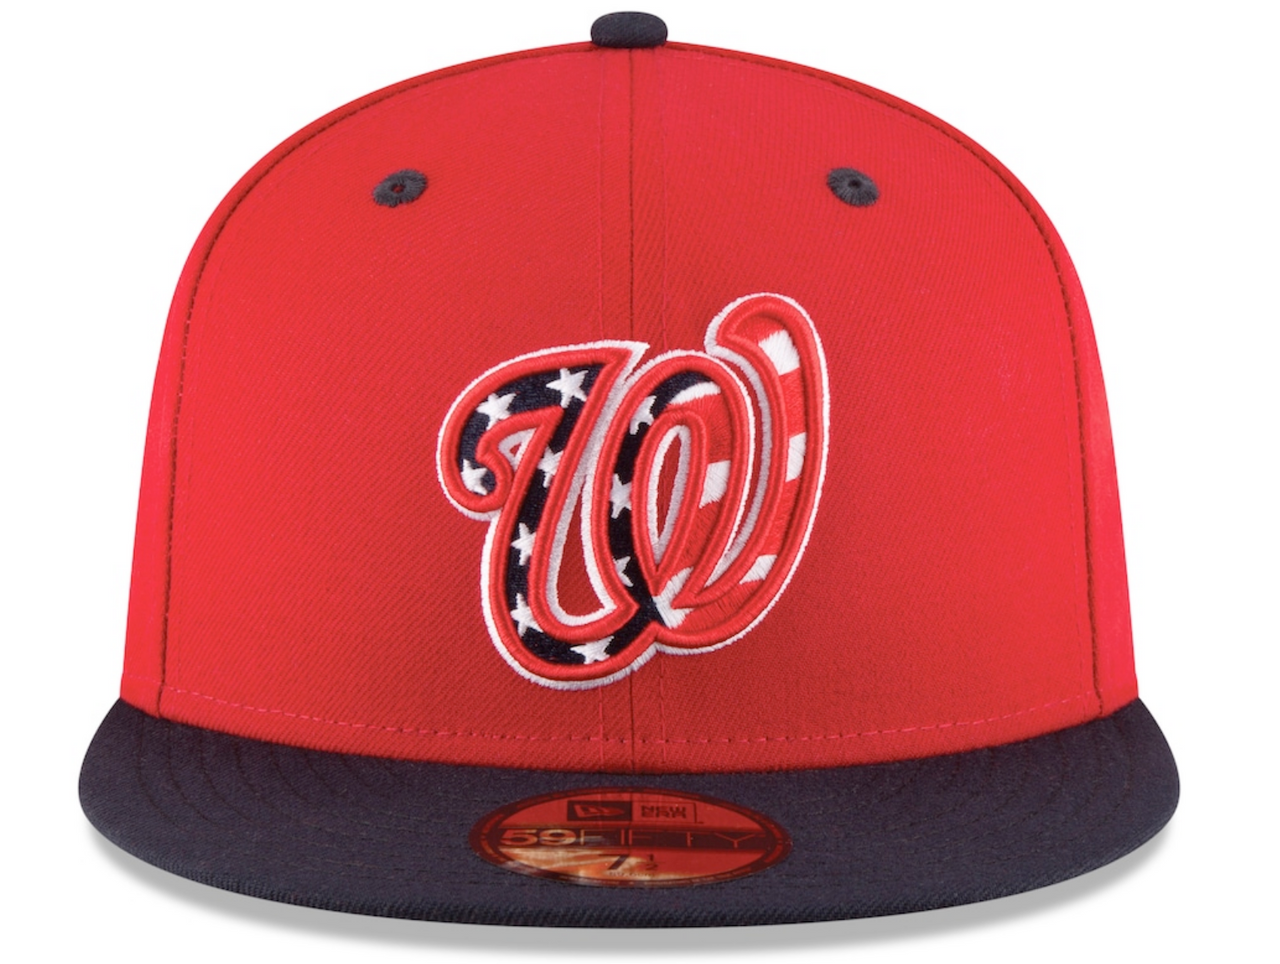 Minnesota Twins New Era Alternate 2 Authentic Collection On-Field 59FIFTY Fitted Hat - Red/Navy